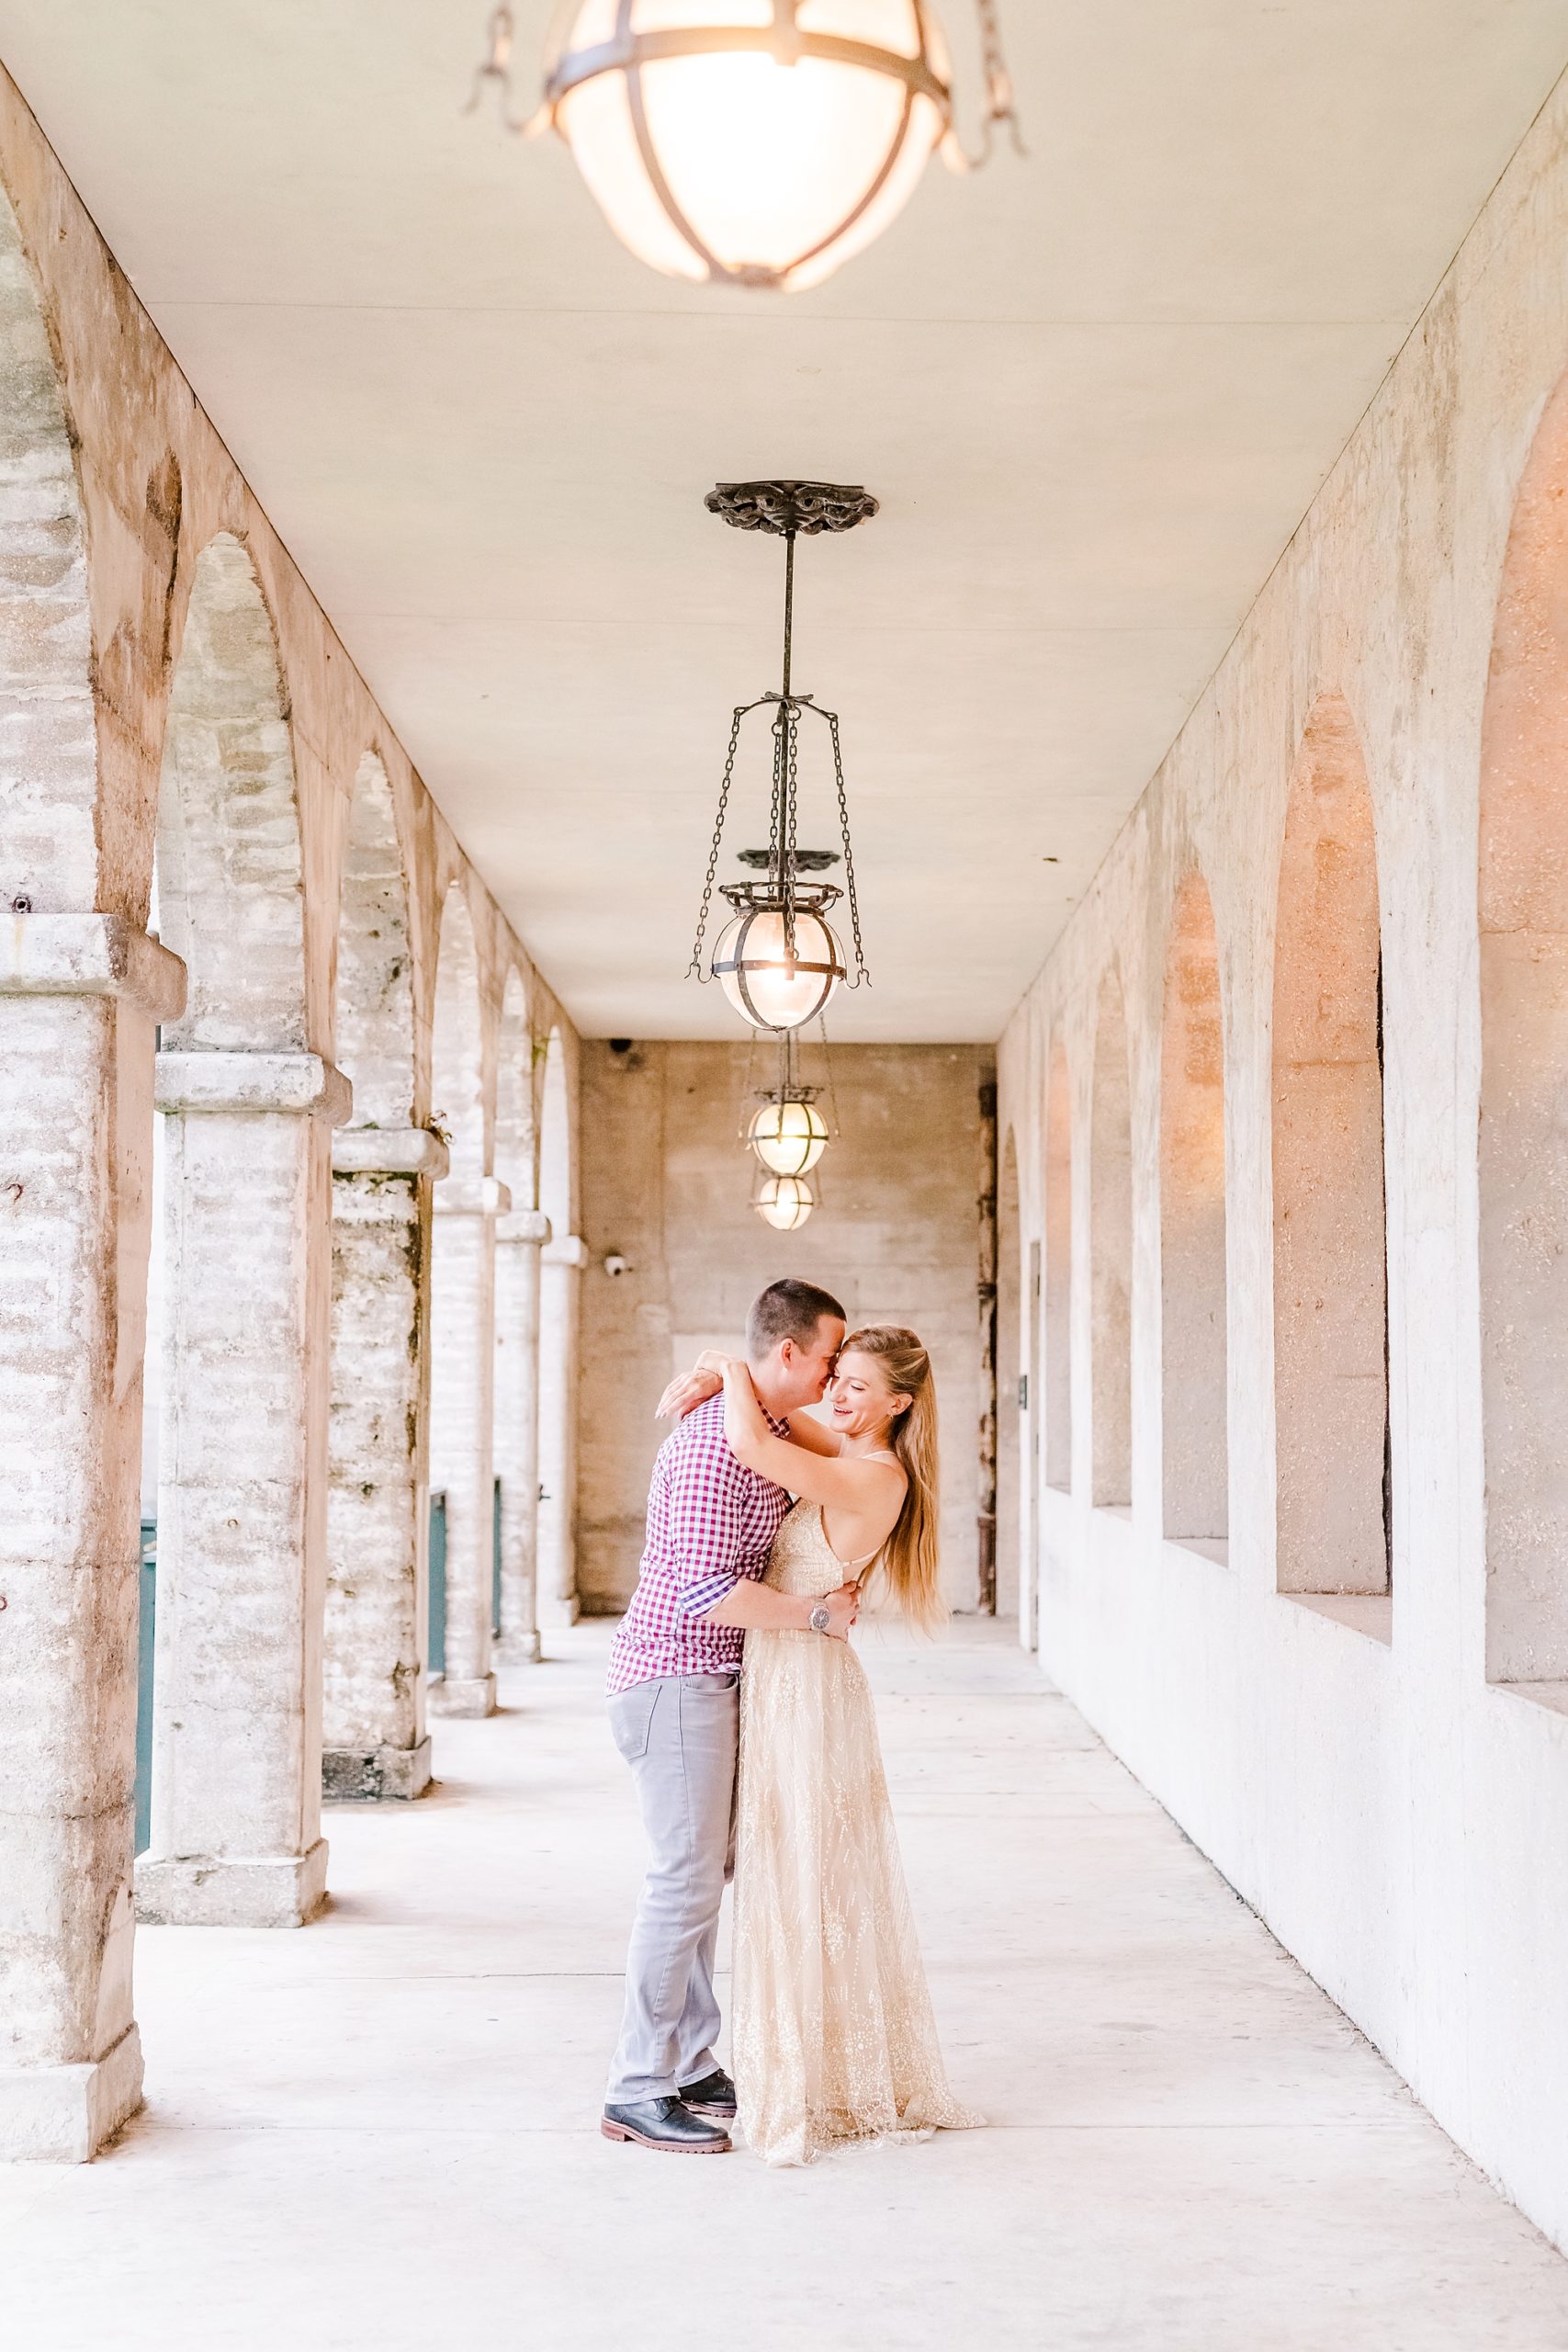 The Lightner Museum Engagement Photos | St. Augustine Engagement | Chynna Pacheco Photography-89